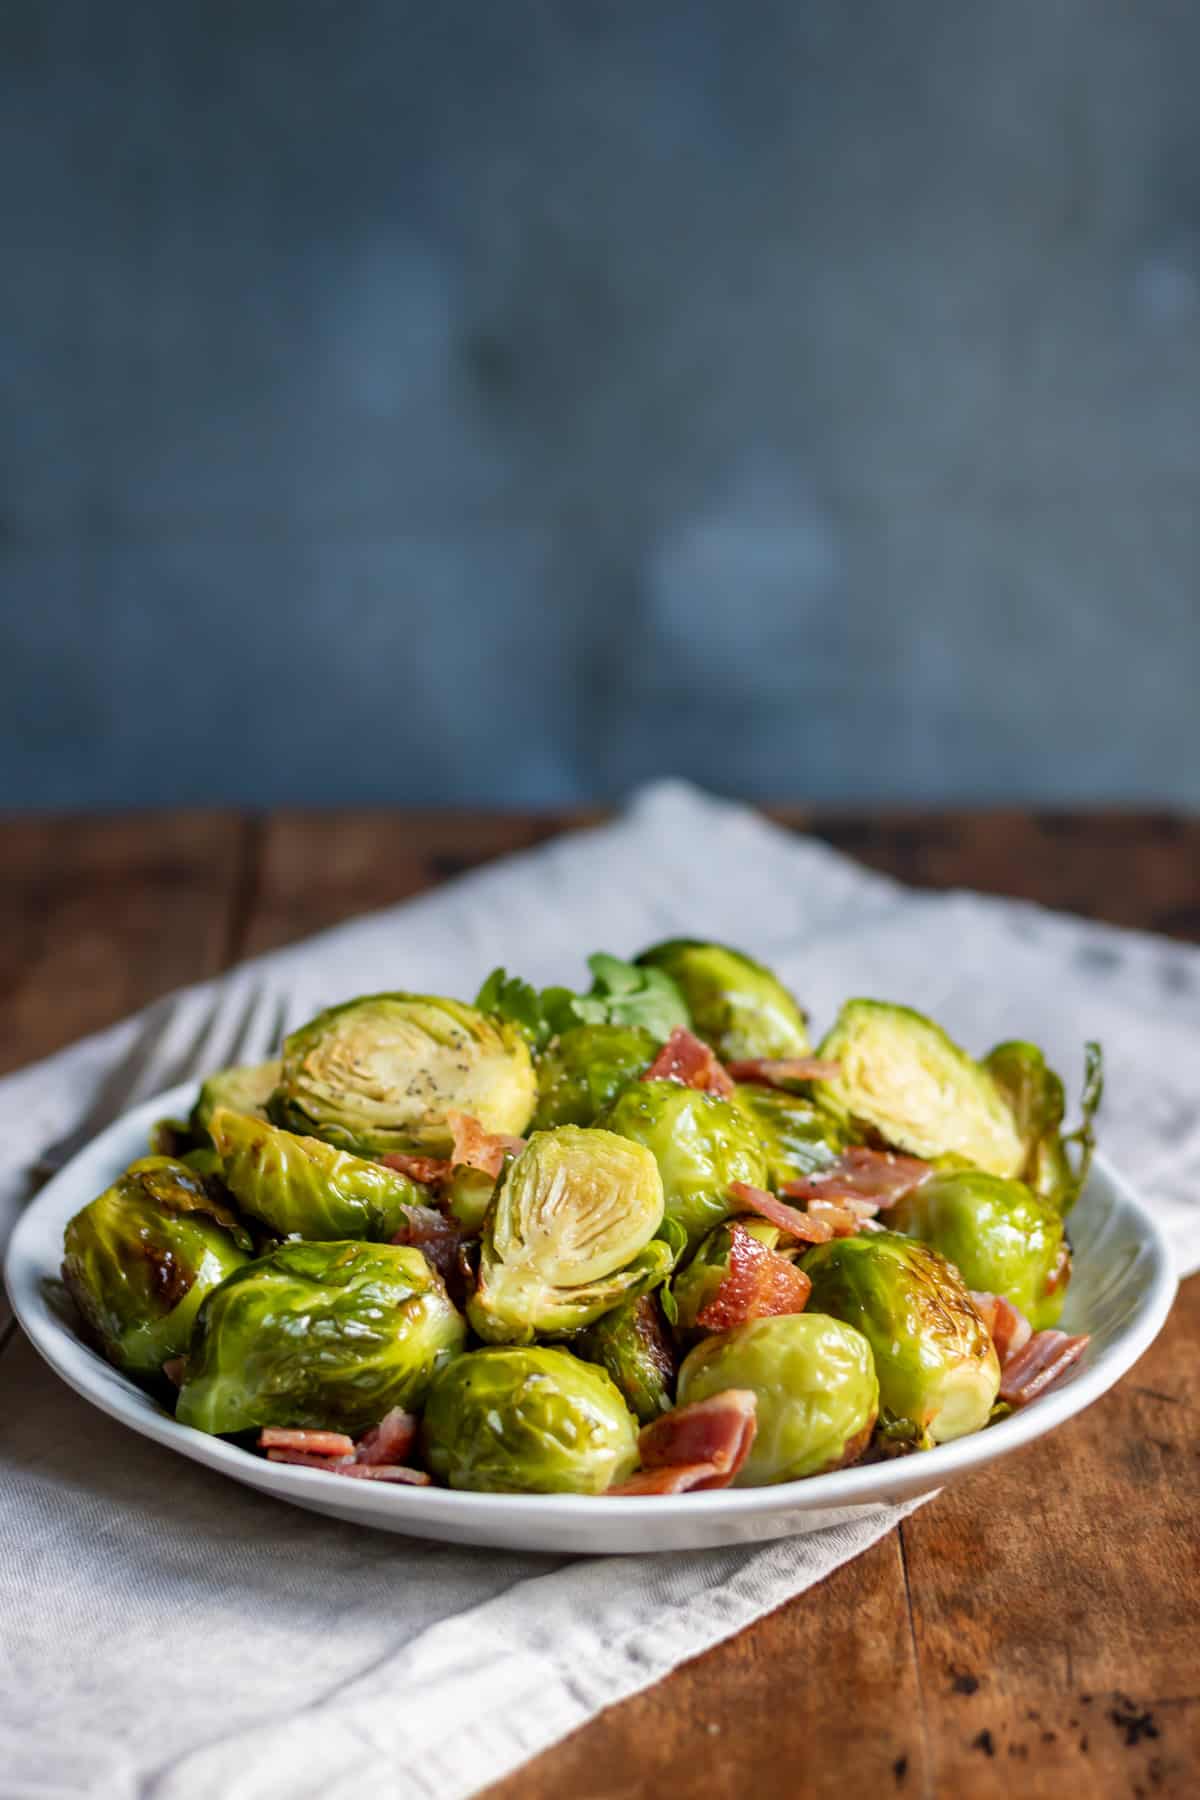 Wooden table with a serving dish of maple bacon brussels sprouts.